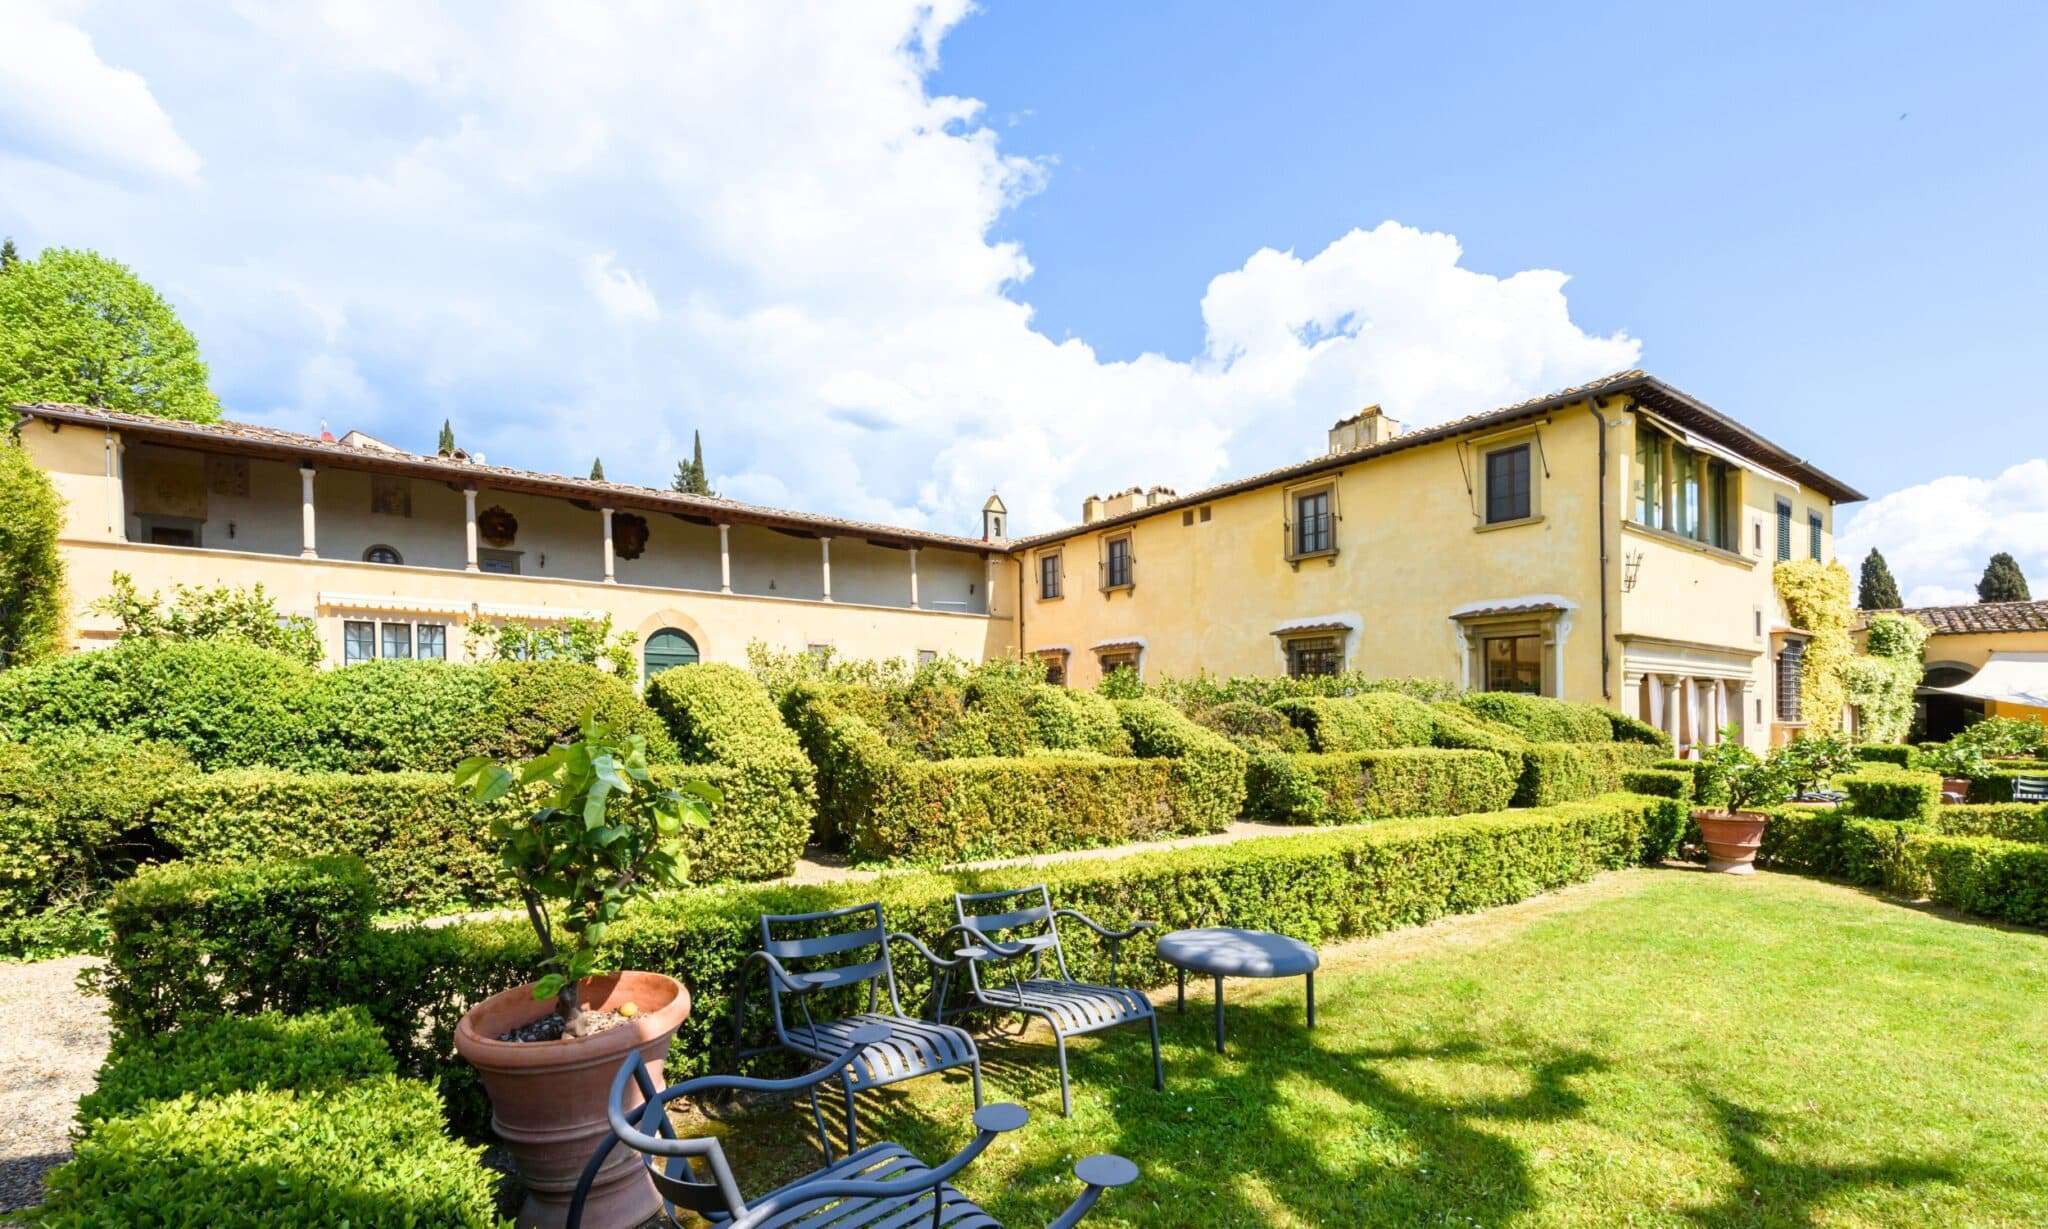 Renaissance Villa with Frescoes and Ancient Thermal Baths on the Hills of Florence.